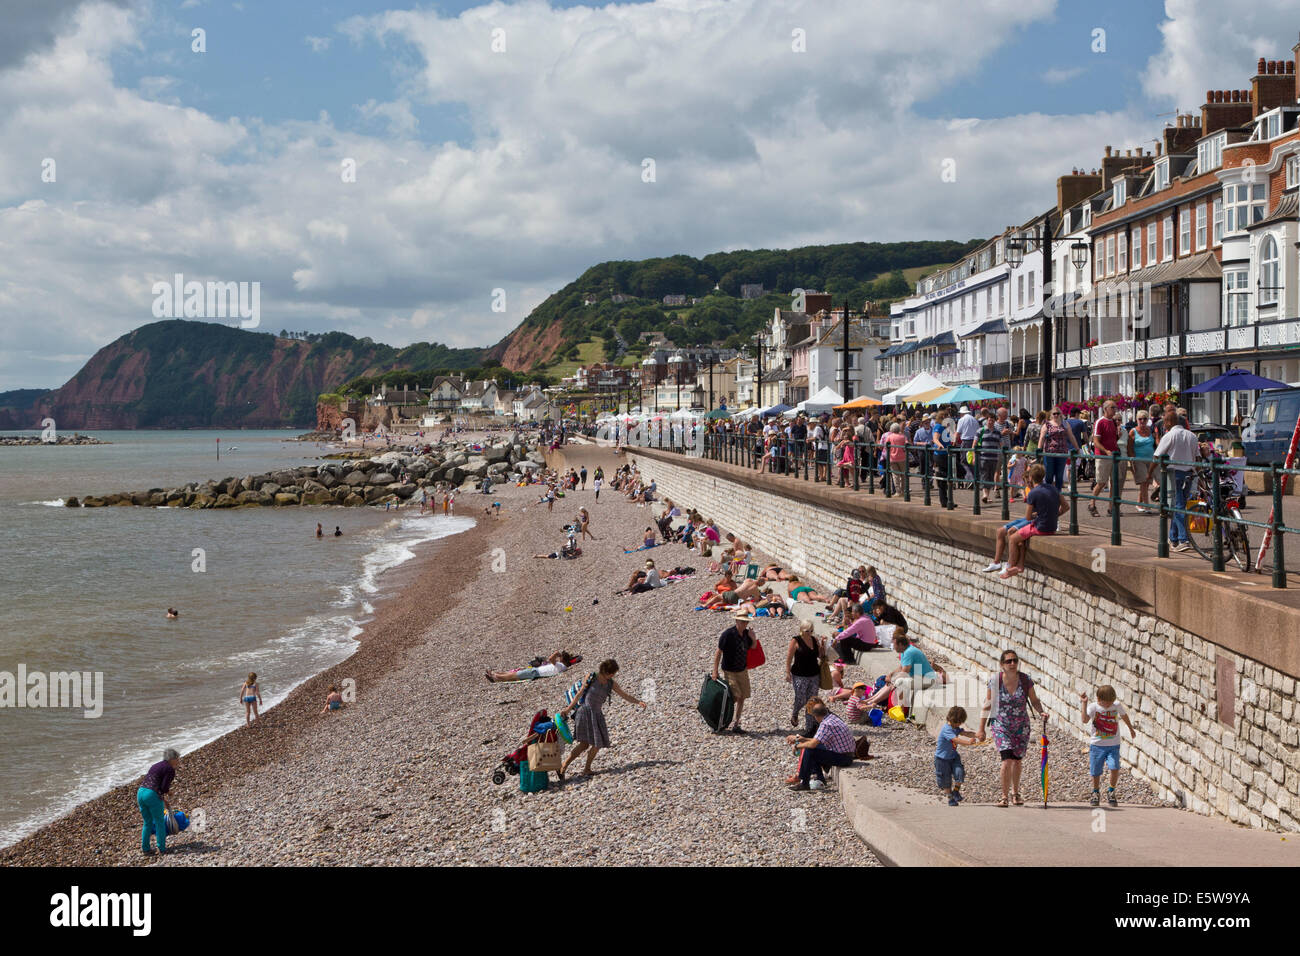 Sea front and beach at Sidmouth during folk festival 2014. Stock Photo